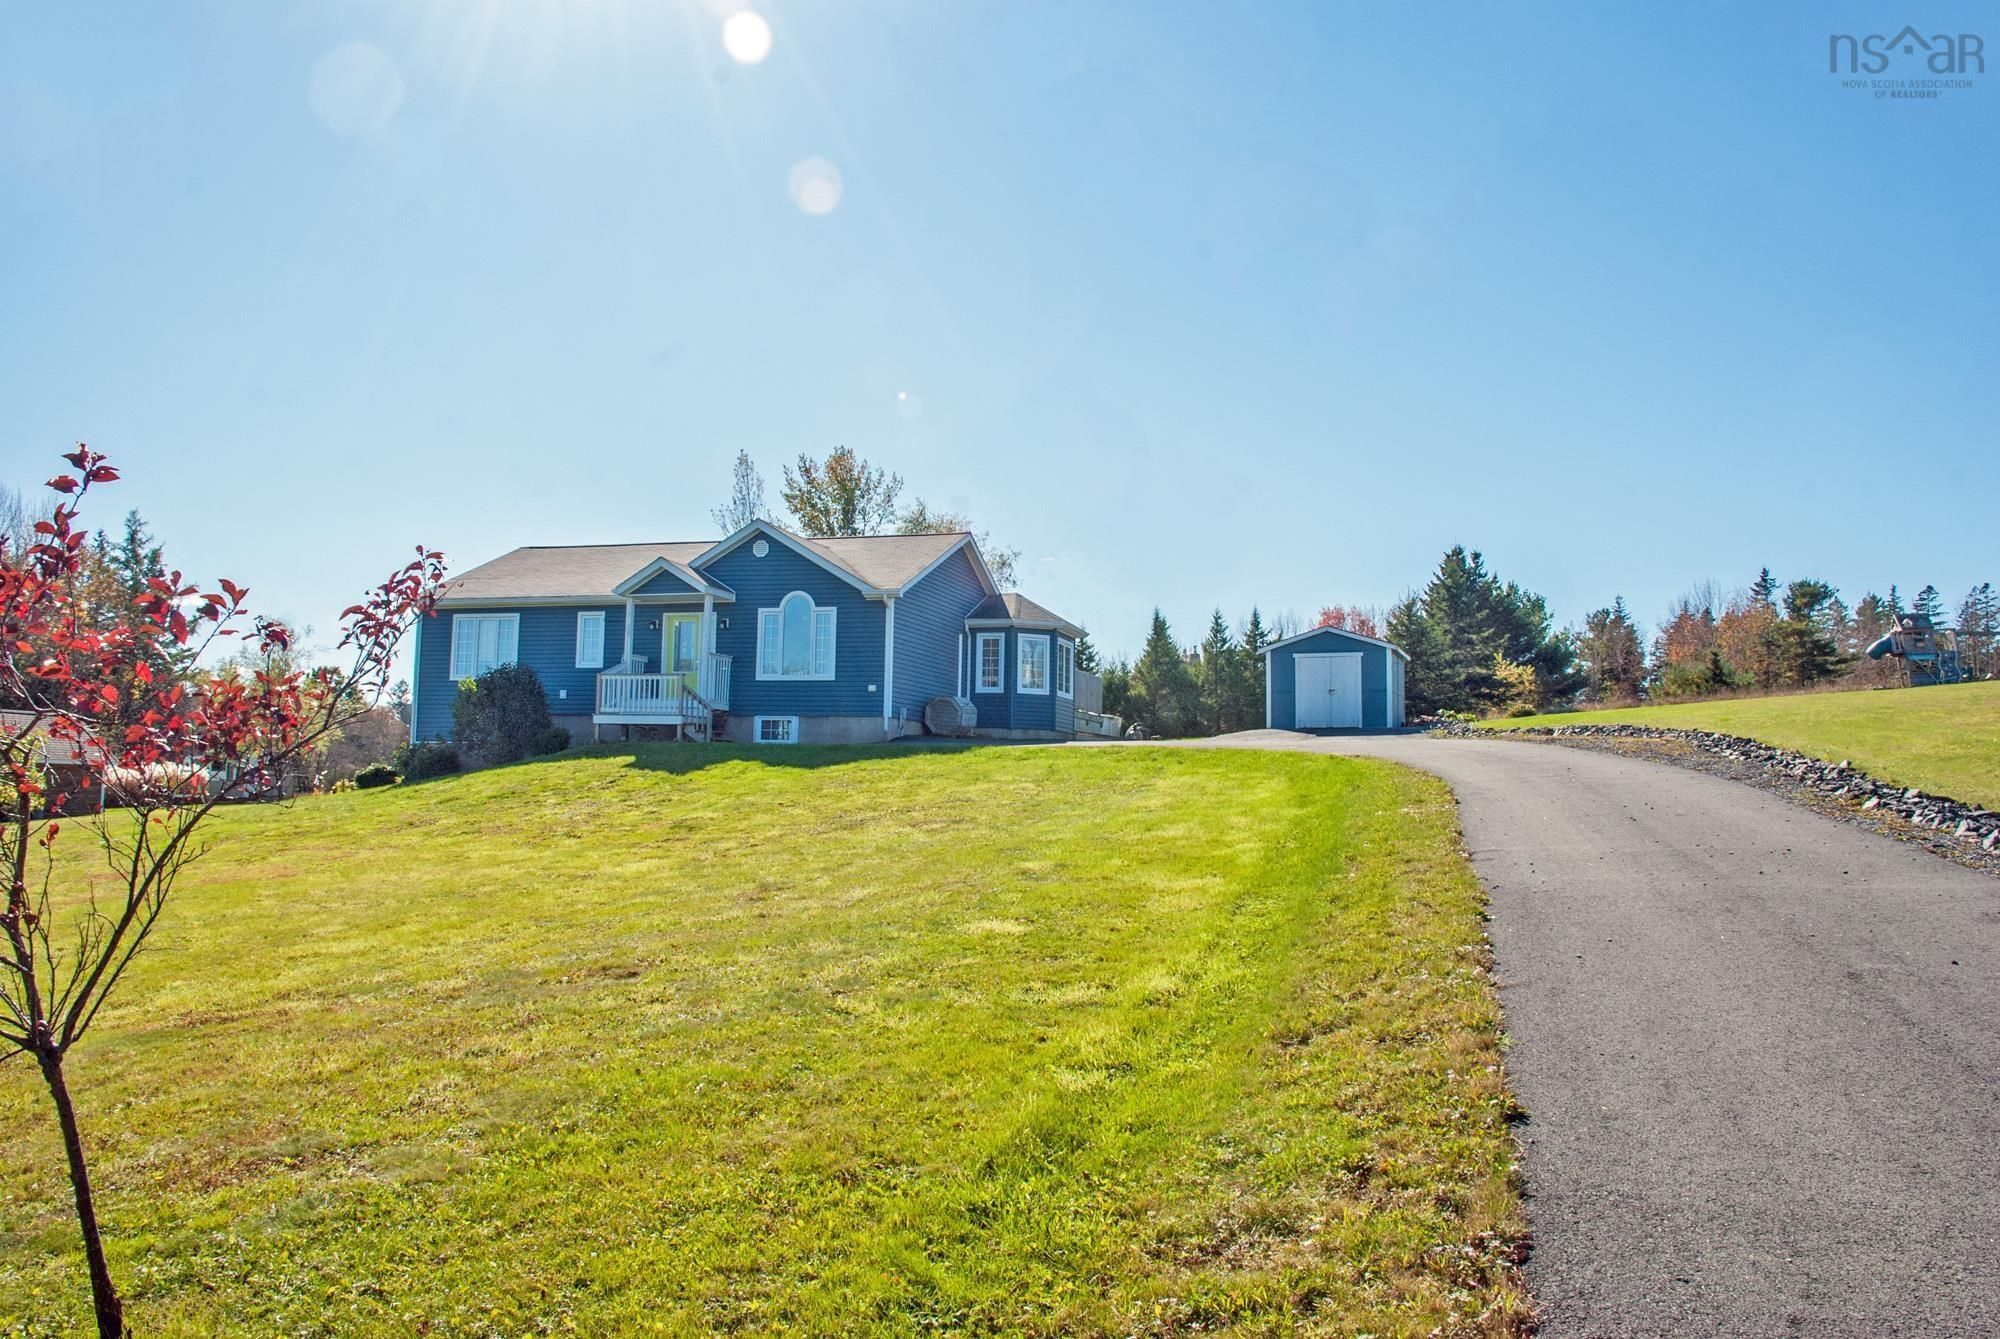 Main Photo: 53 Bulmer Road in Centre: 405-Lunenburg County Residential for sale (South Shore)  : MLS®# 202224014